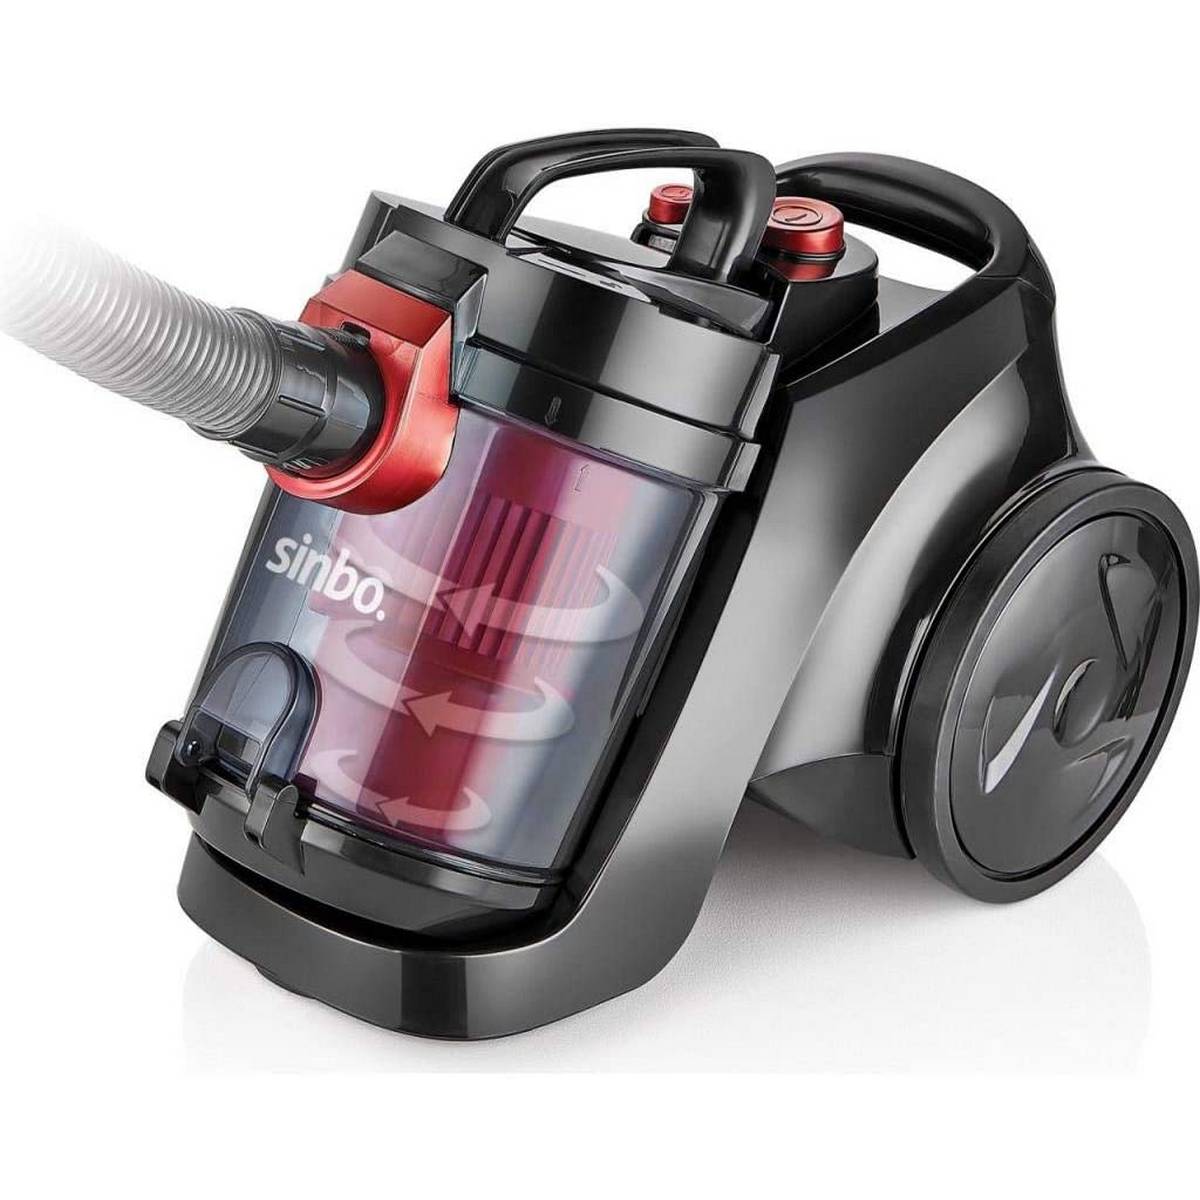 Sinbo Bagless Cyclonic Vacuum Cleaner Svc-8601